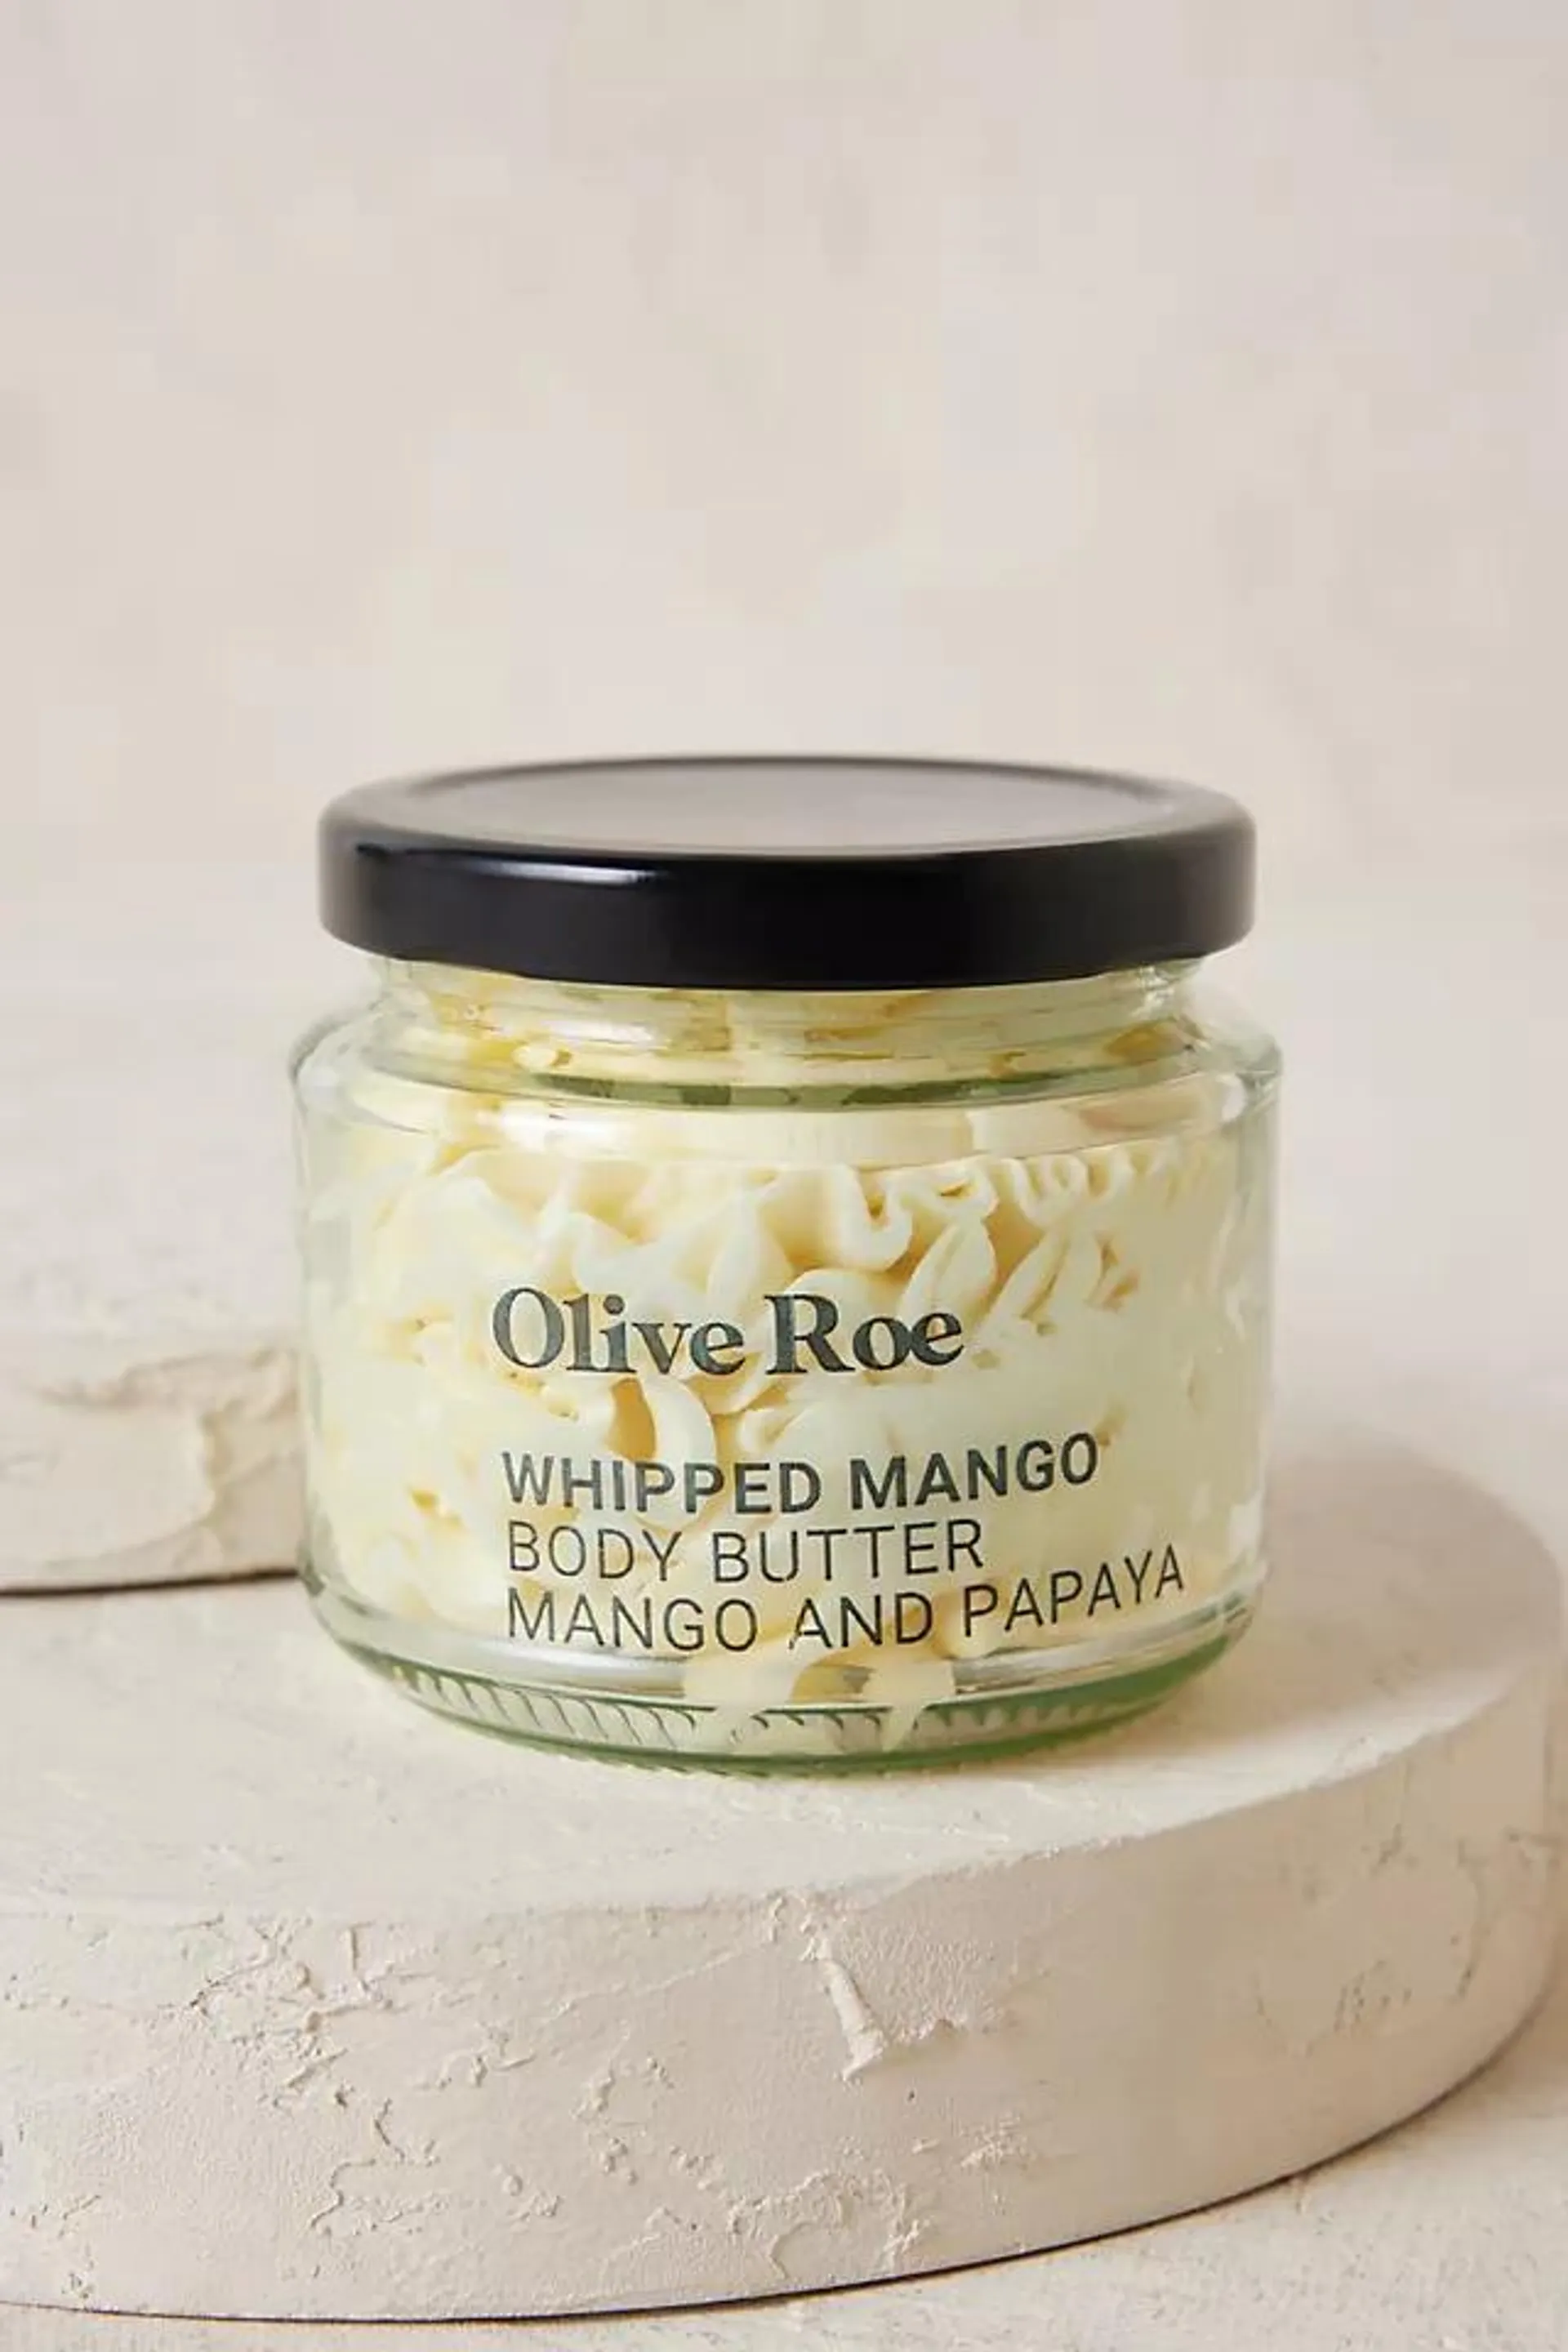 Olive Roe Body Butter